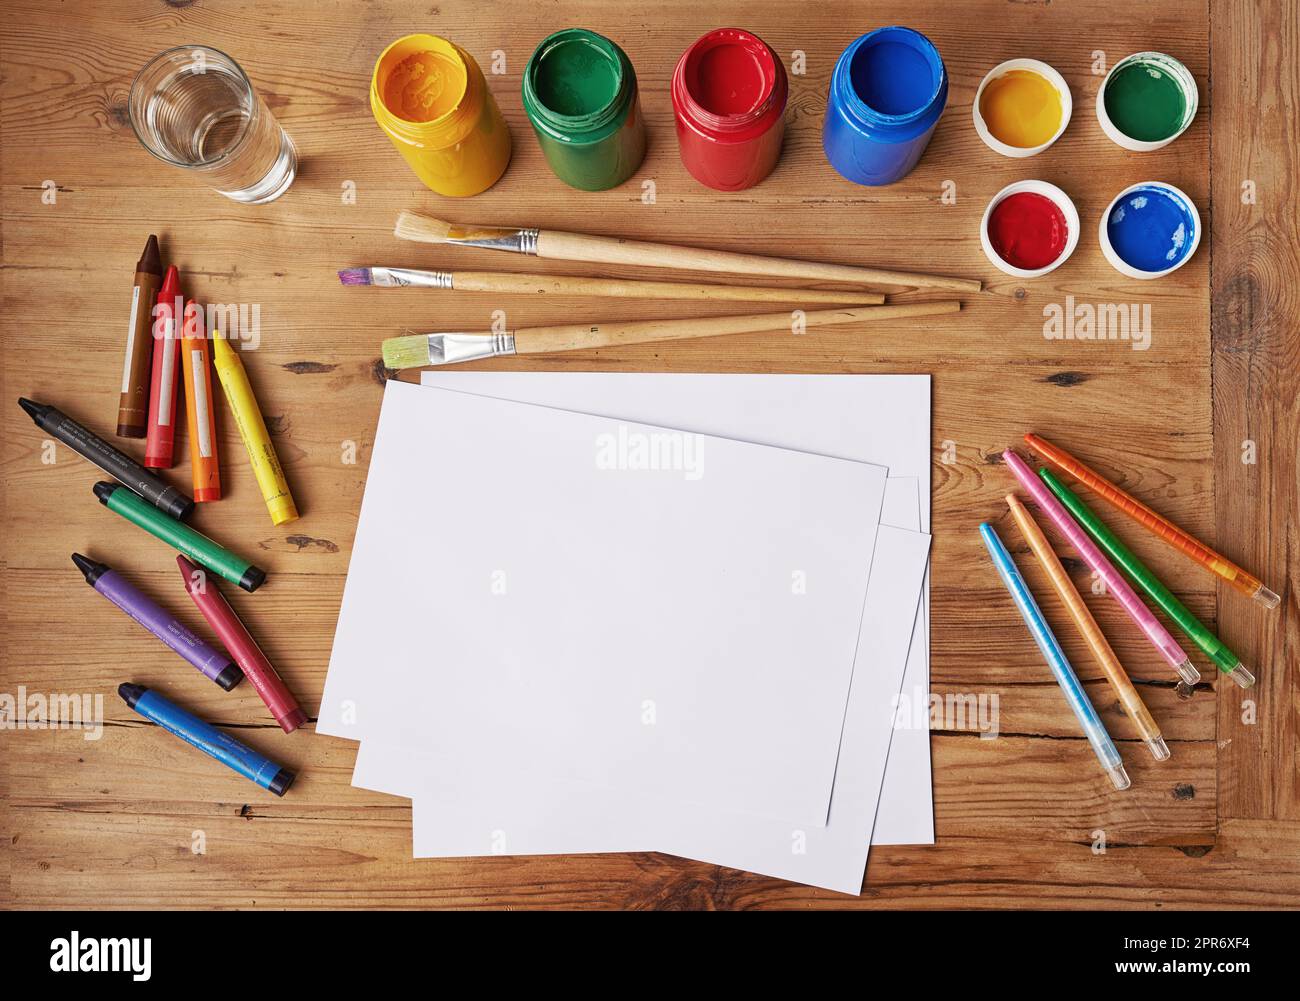 Creativity never goes out of style. Blank white paper with painting supplies and pencils on a wooden table. Stock Photo